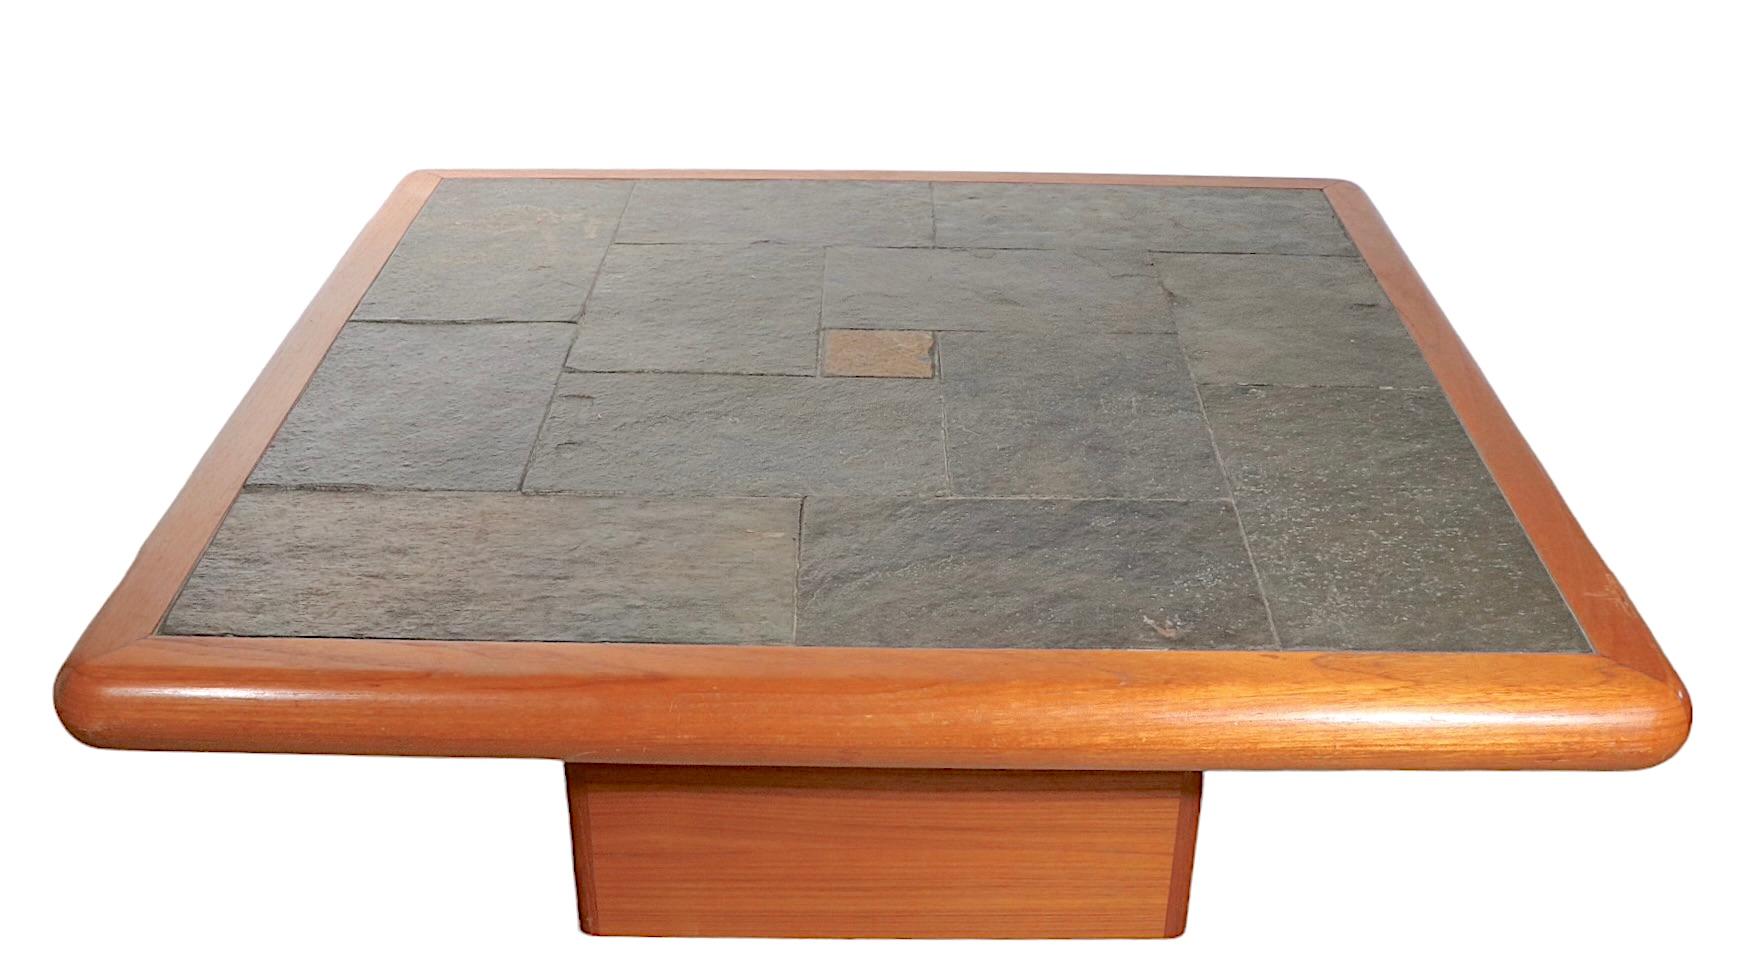 Chic vintage Sallingboe coffee table having a geometric inlay slate top, mounted in a thick teak frame, which rests on a center rectangular teak pedestal base. The table is in very good, vintage condition, it shows a couple of cosmetic blemishes,